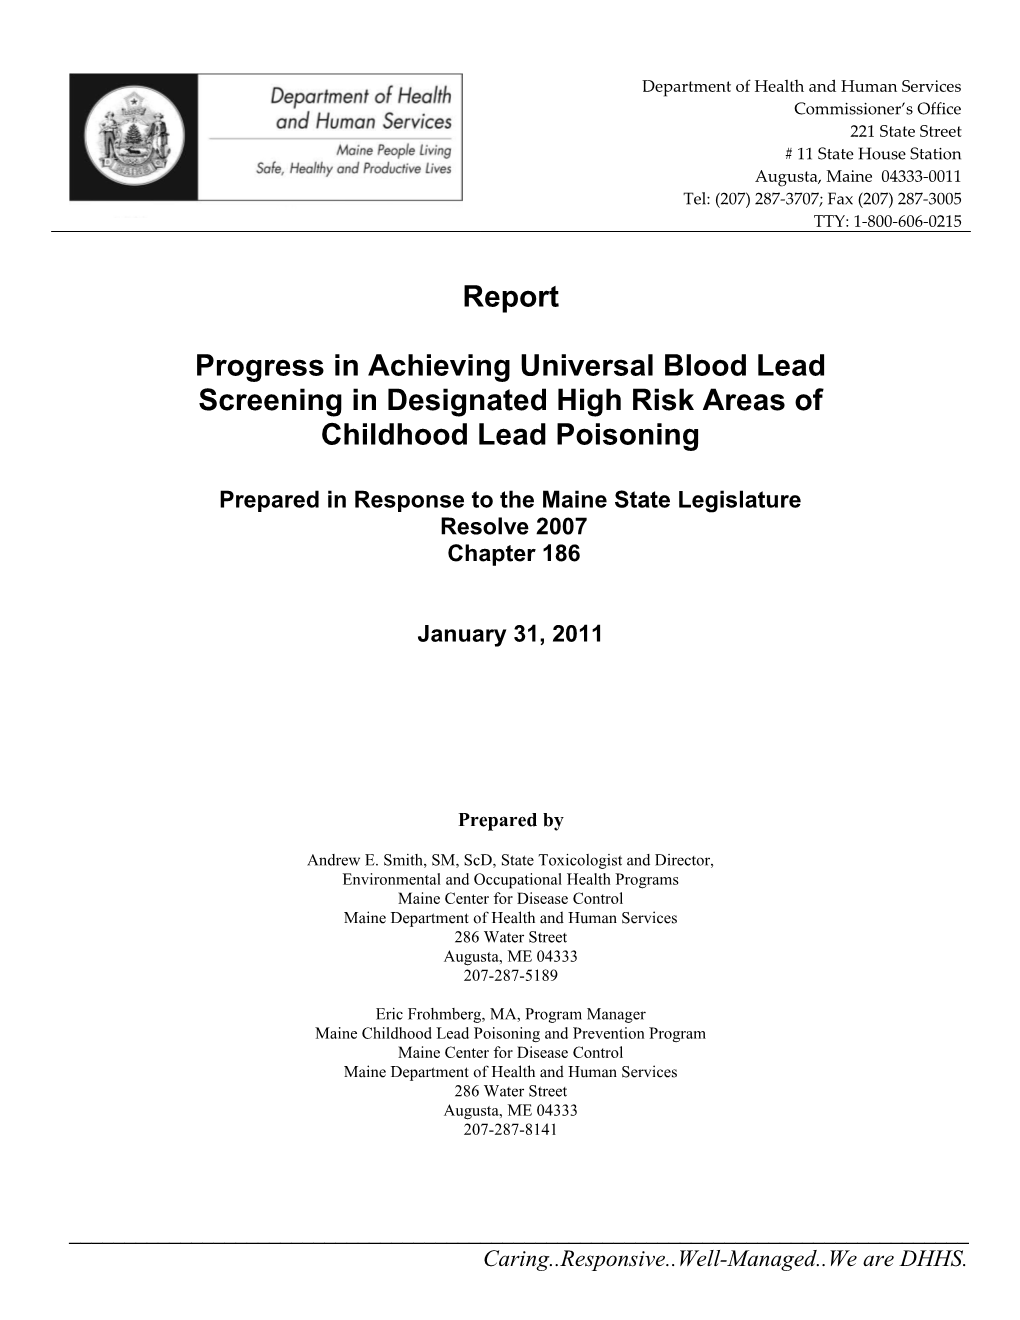 Report to Joint Standing Committee on HHS for Resolve 2007 Chapter 186